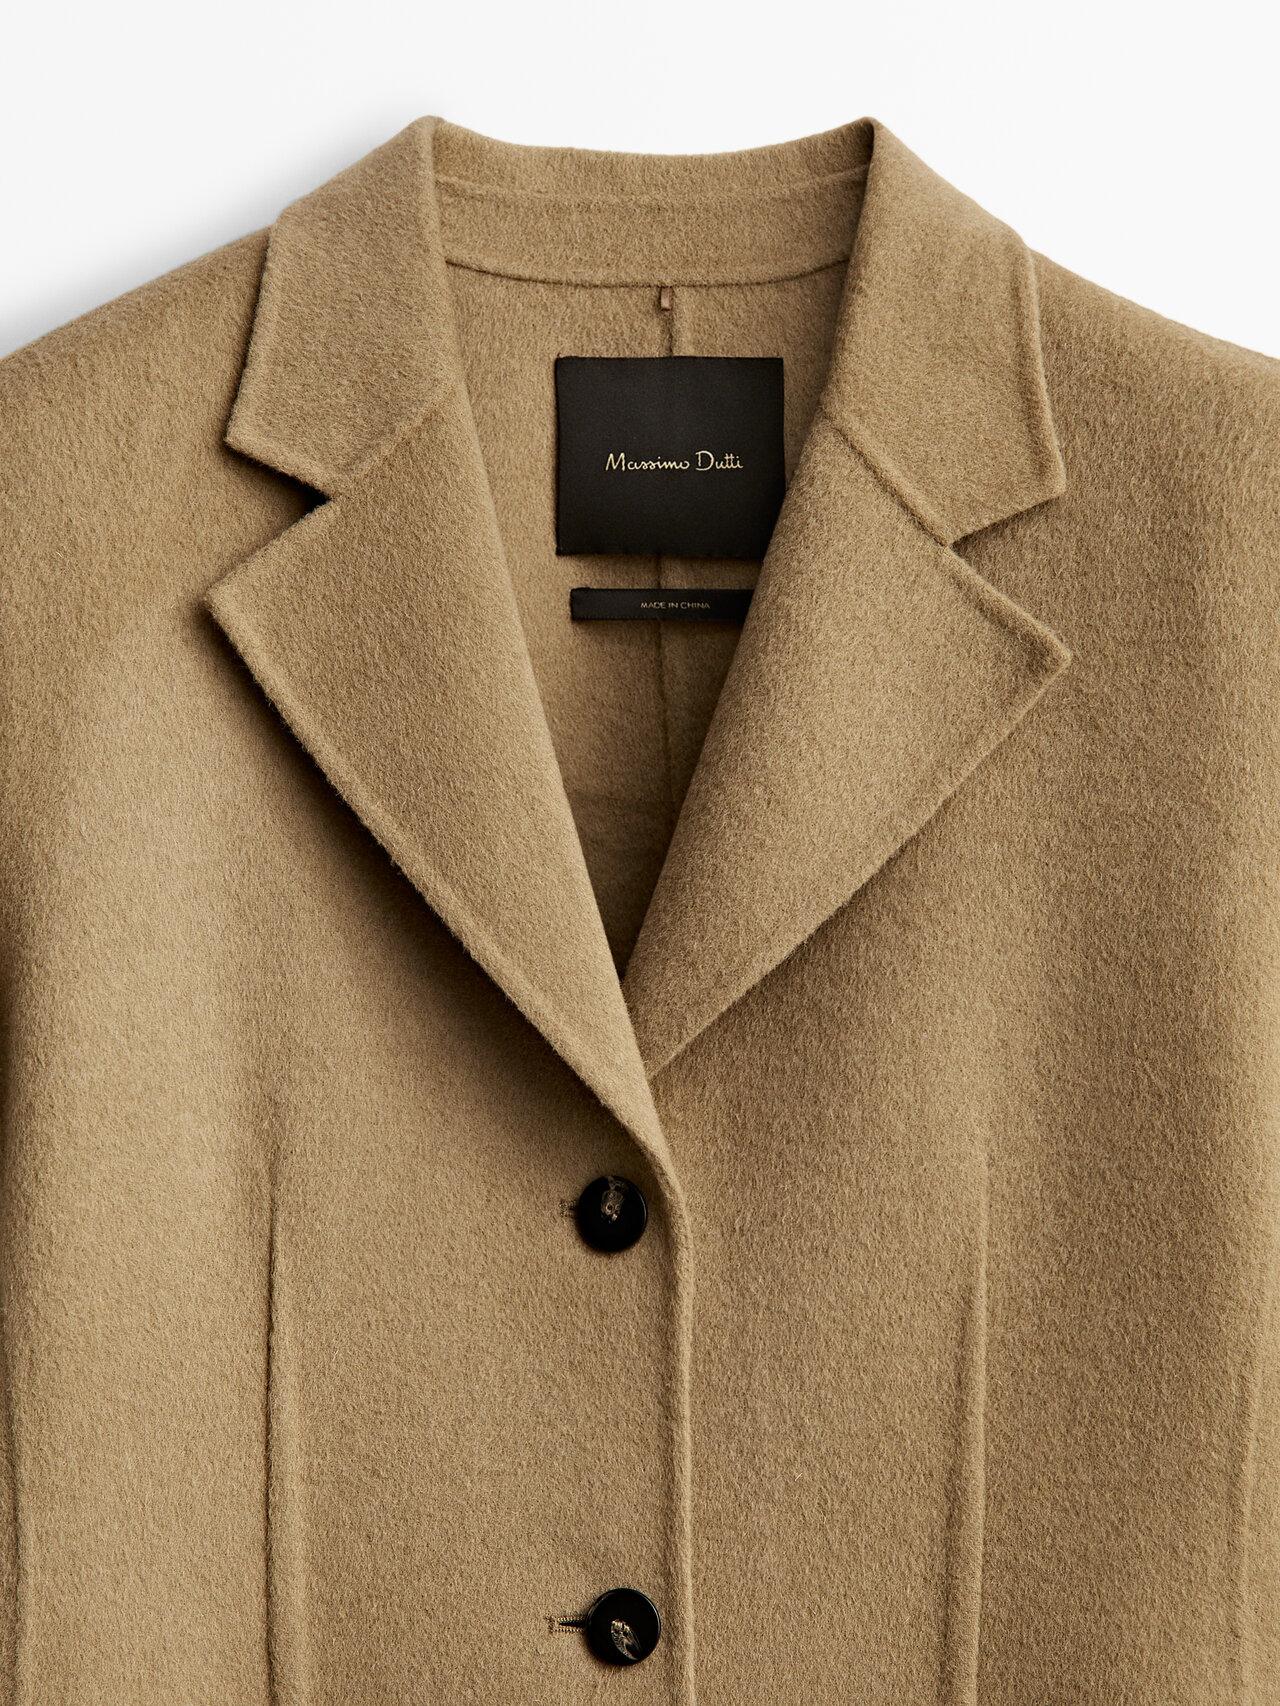 MASSIMO DUTTI Long Wool Blend Coat With Shoulder Pads in Natural | Lyst